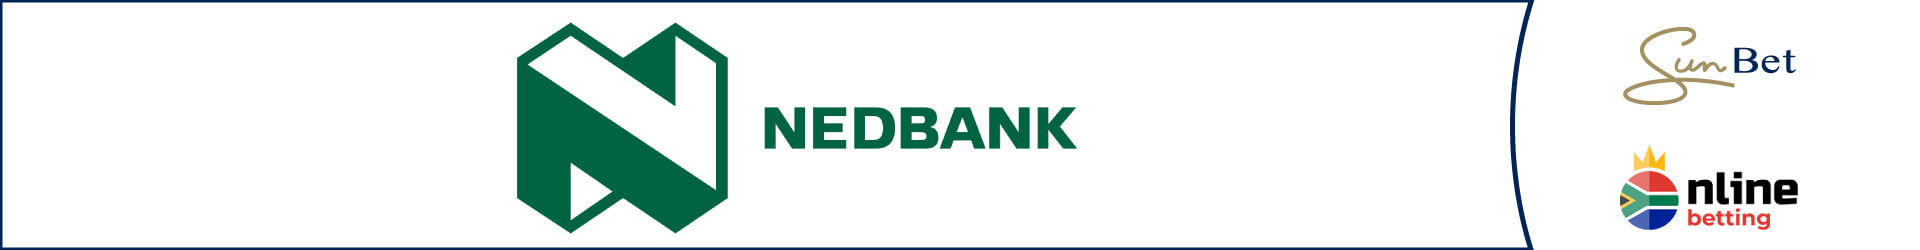 How to Withdraw by Nedbank Send iMali